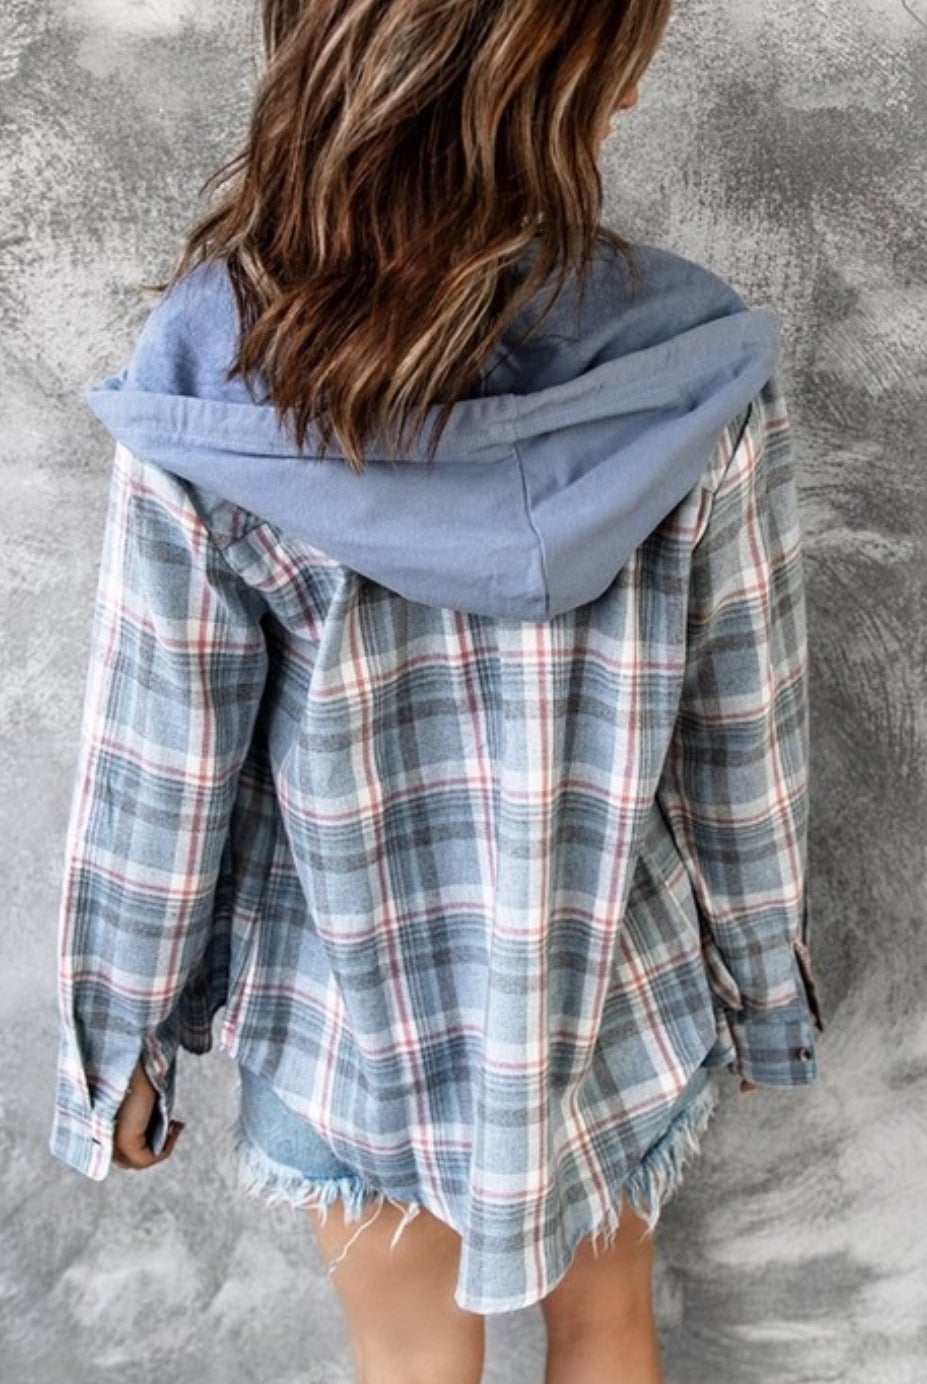 Plaid button up hoodies